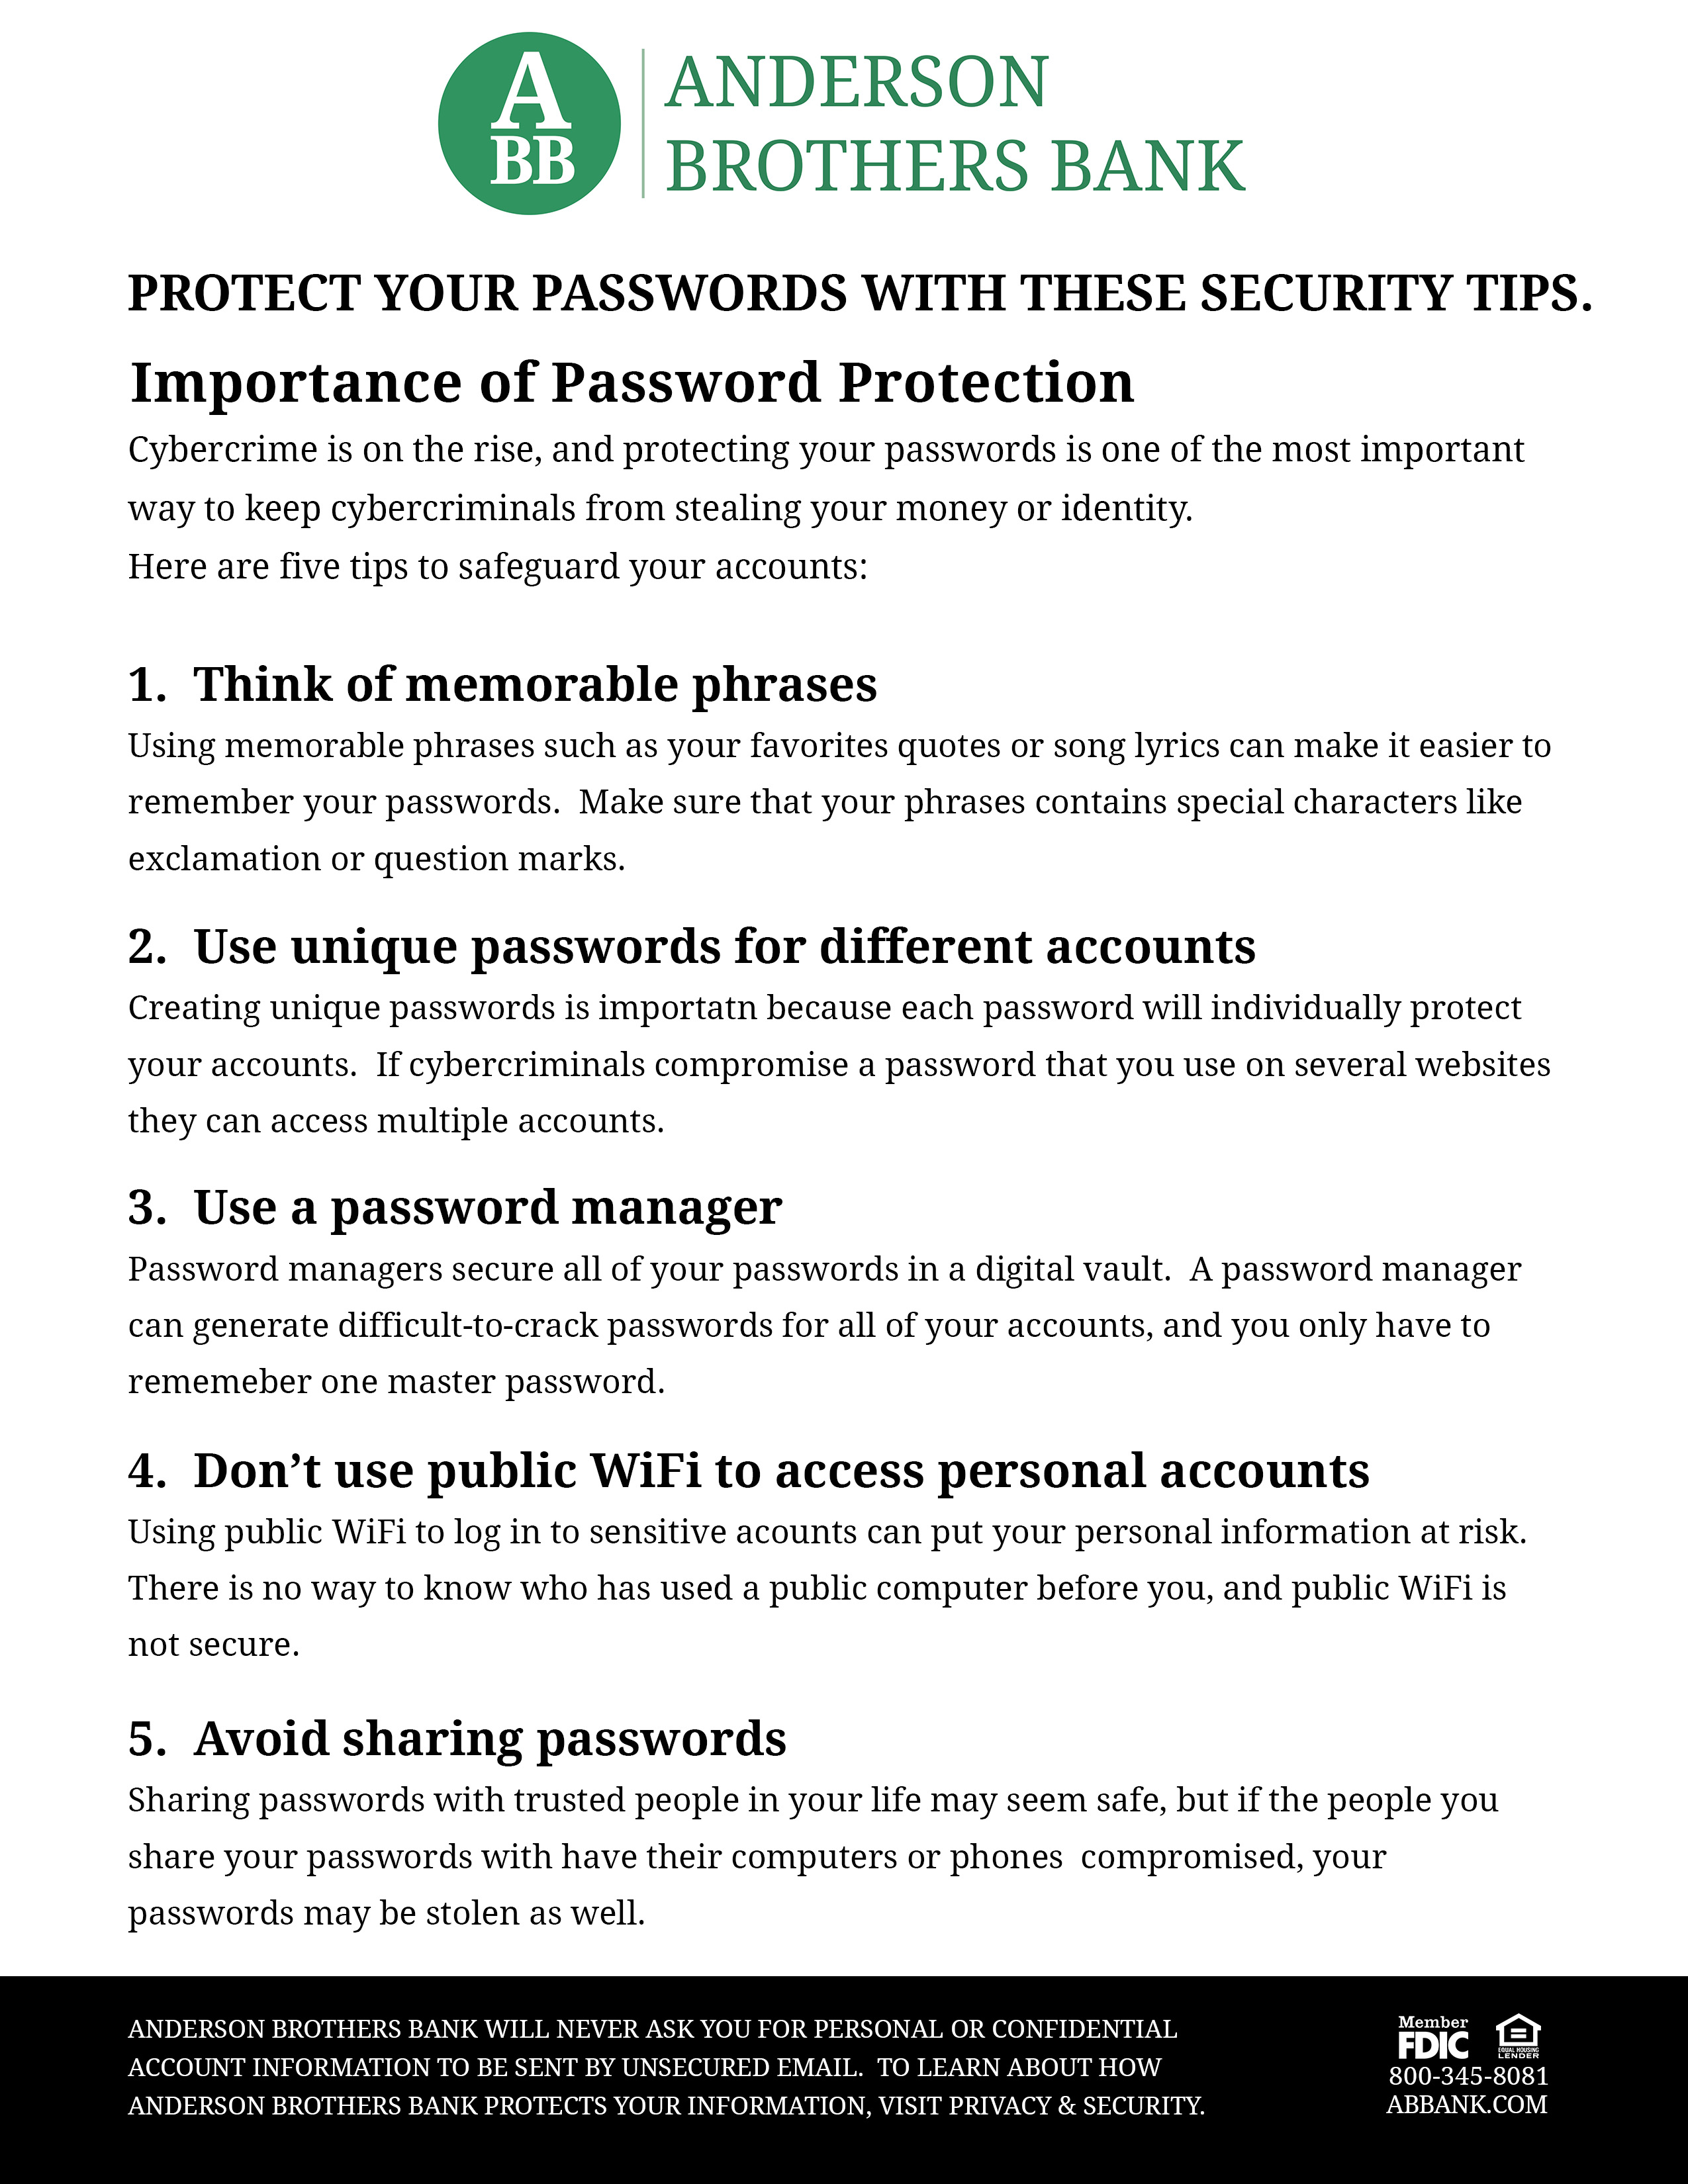 Protect You Passwords with these security tips.